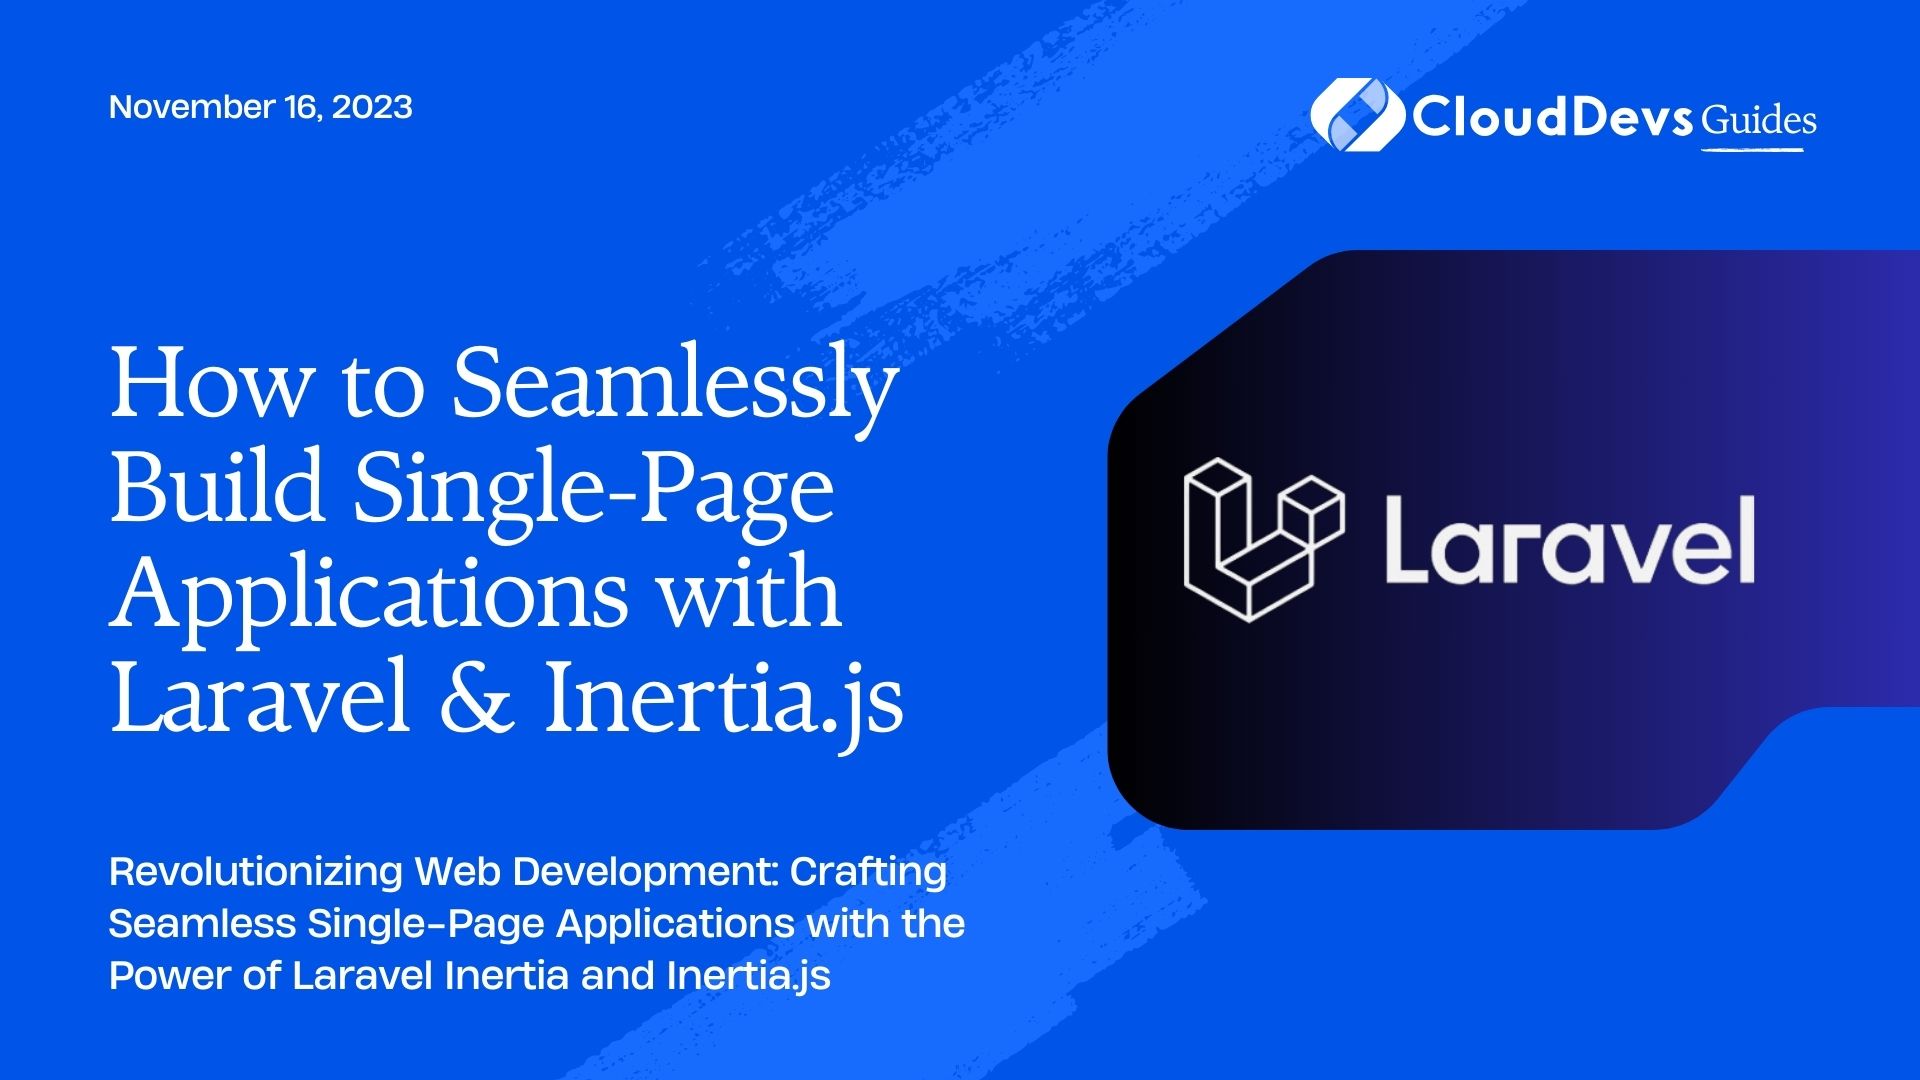 How to Seamlessly Build Single-Page Applications with Laravel & Inertia.js